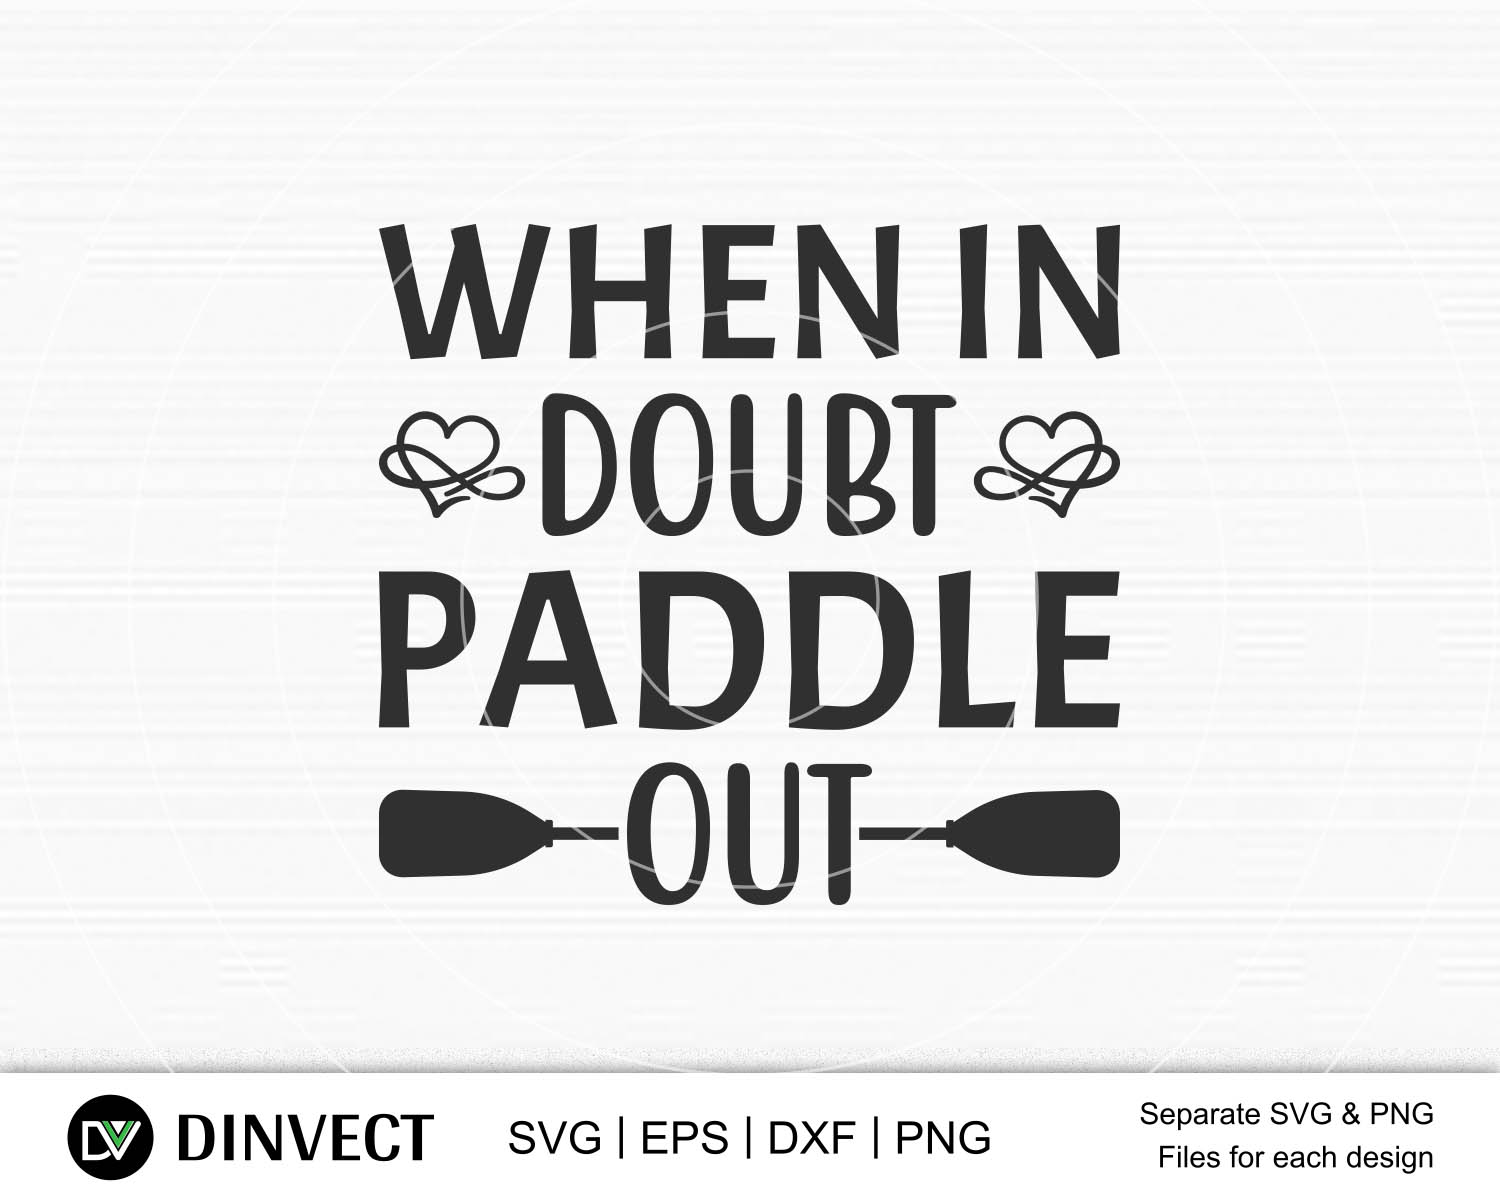 Download When In Doubt Paddle Out Svg File Kayak Svg File Kayaking Svg Canoe Svg Canoe Silhouette Sport Outdoor Svg Sport Outdoor Svg Water Sports Svg Boats Svg Silhouette Came So Fontsy